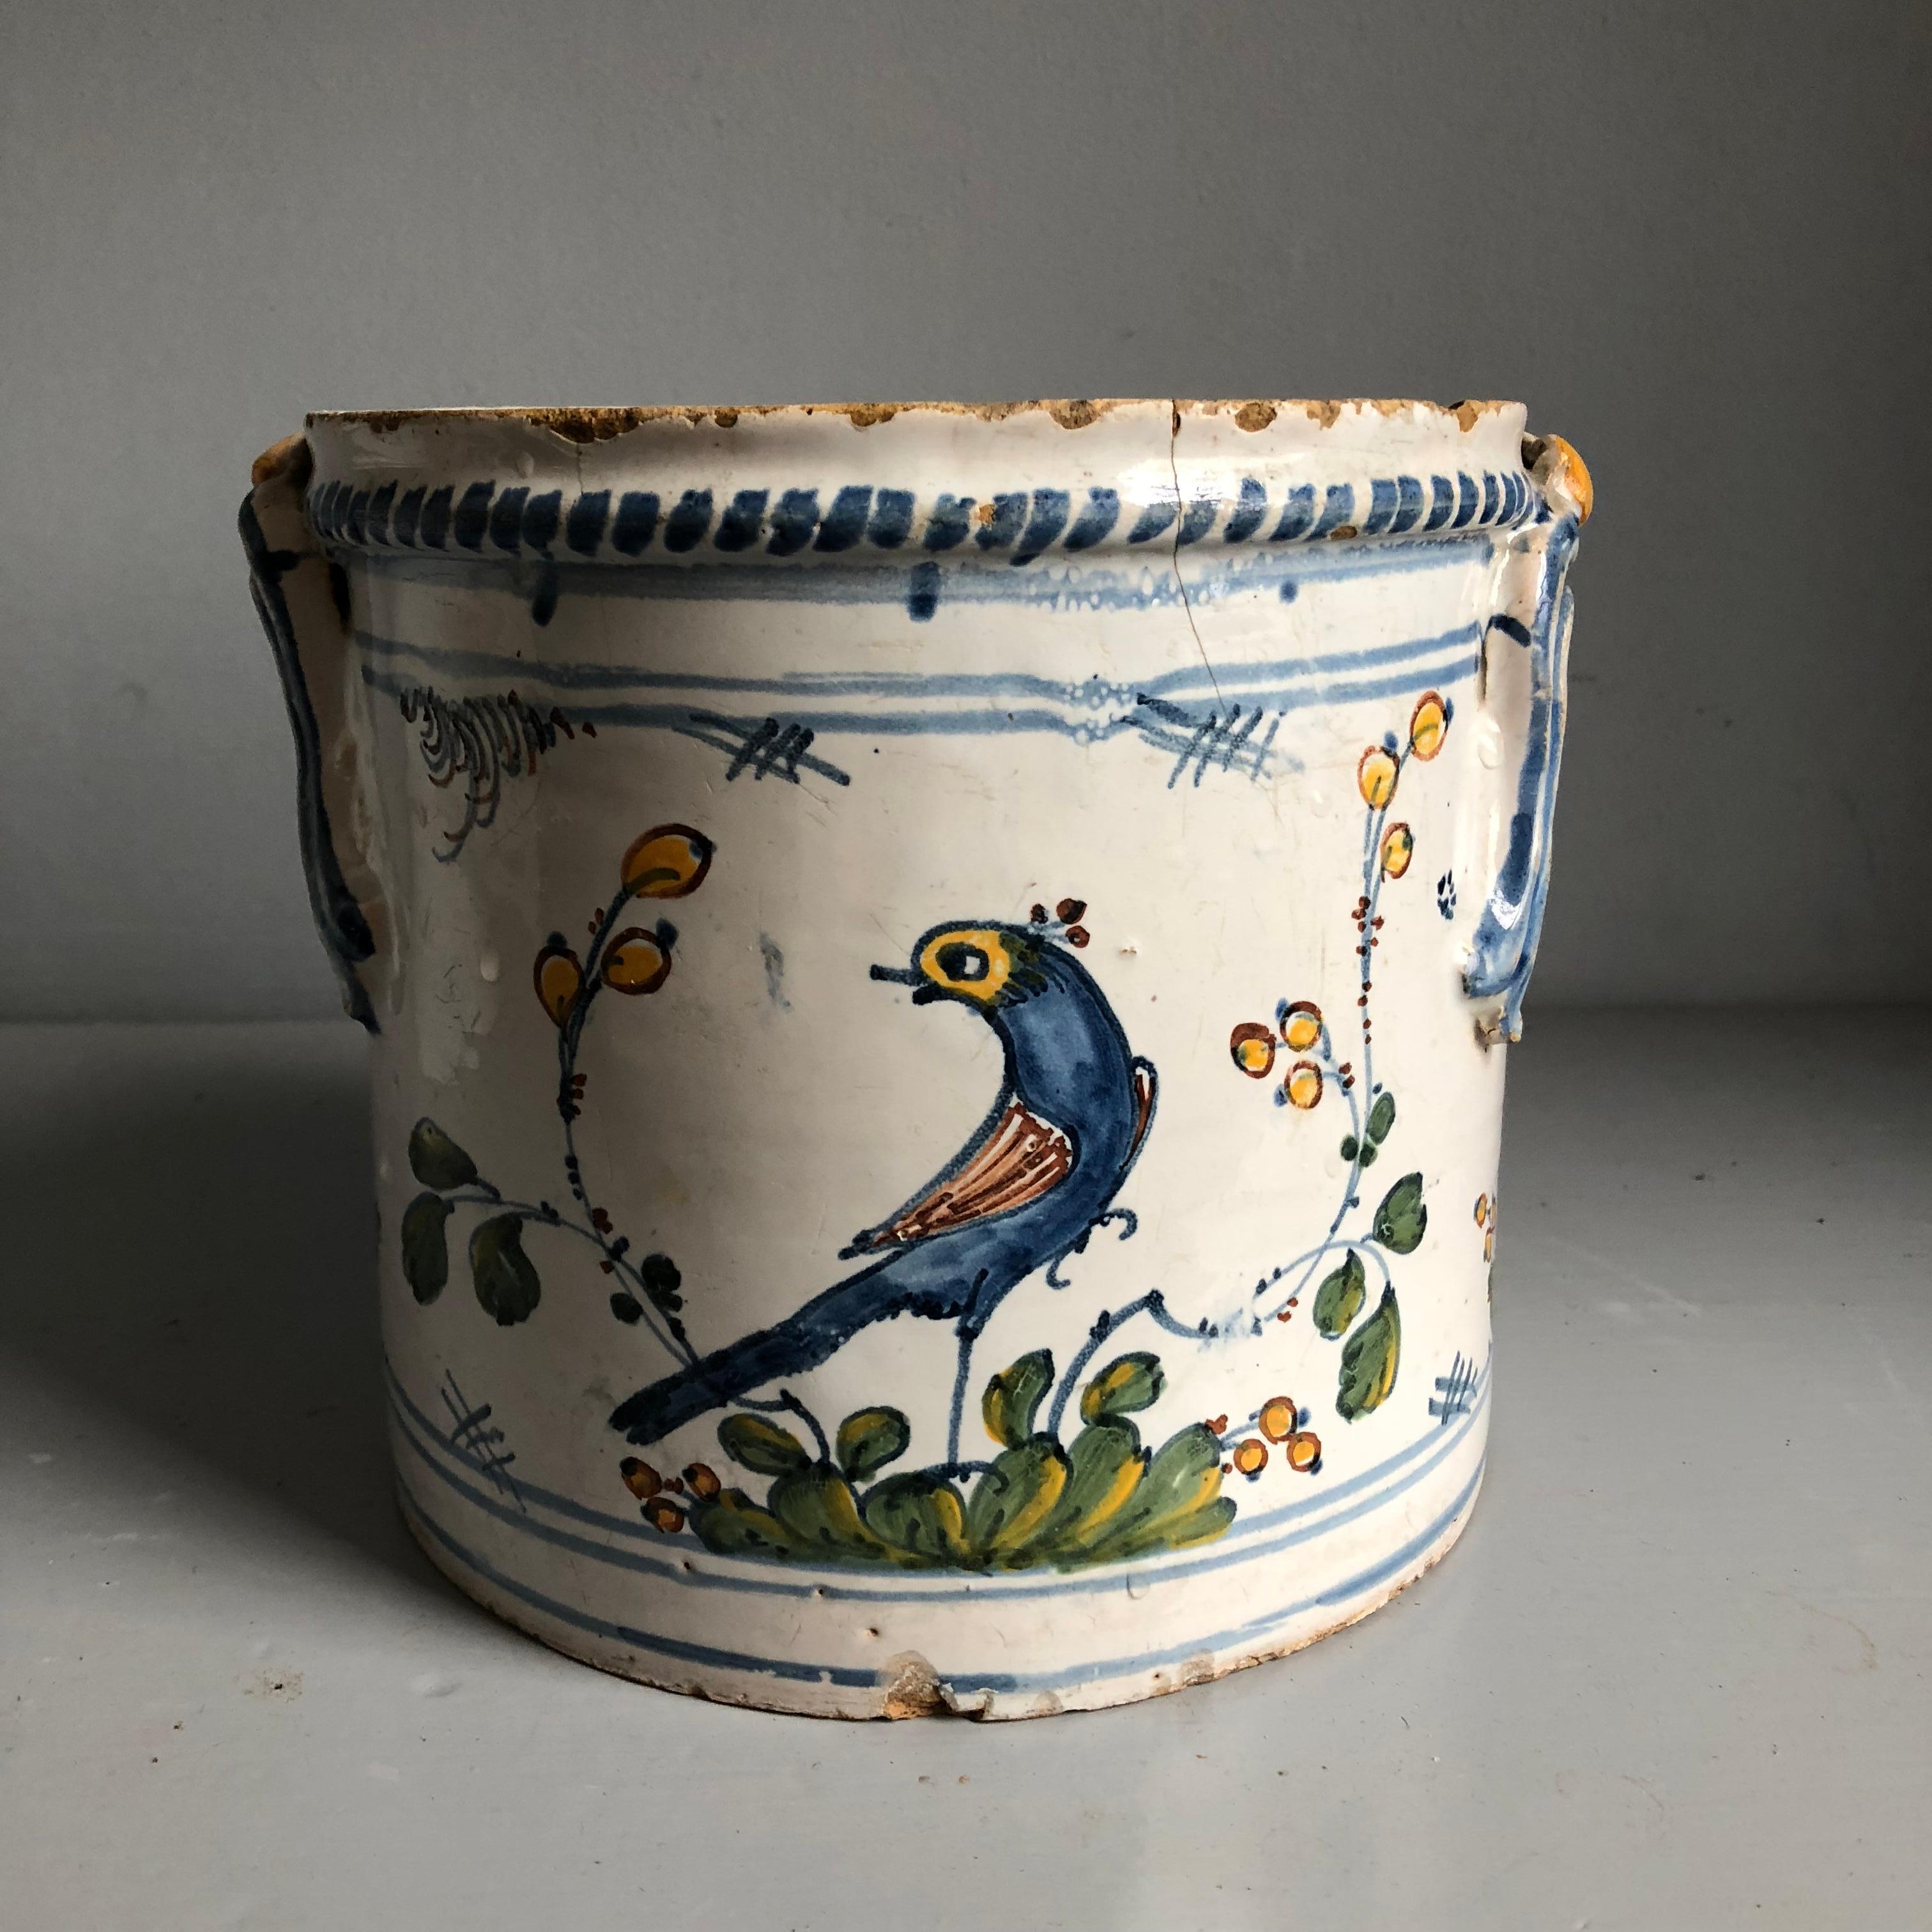 A charming 18th century faience “cachepot” planter decorated with birds, flowers etc., circa 1750 from Nevers, France. From the estate of Pierre Moulin, founder of the Pierre Deux shops and author of Pierre Deux’s French country.